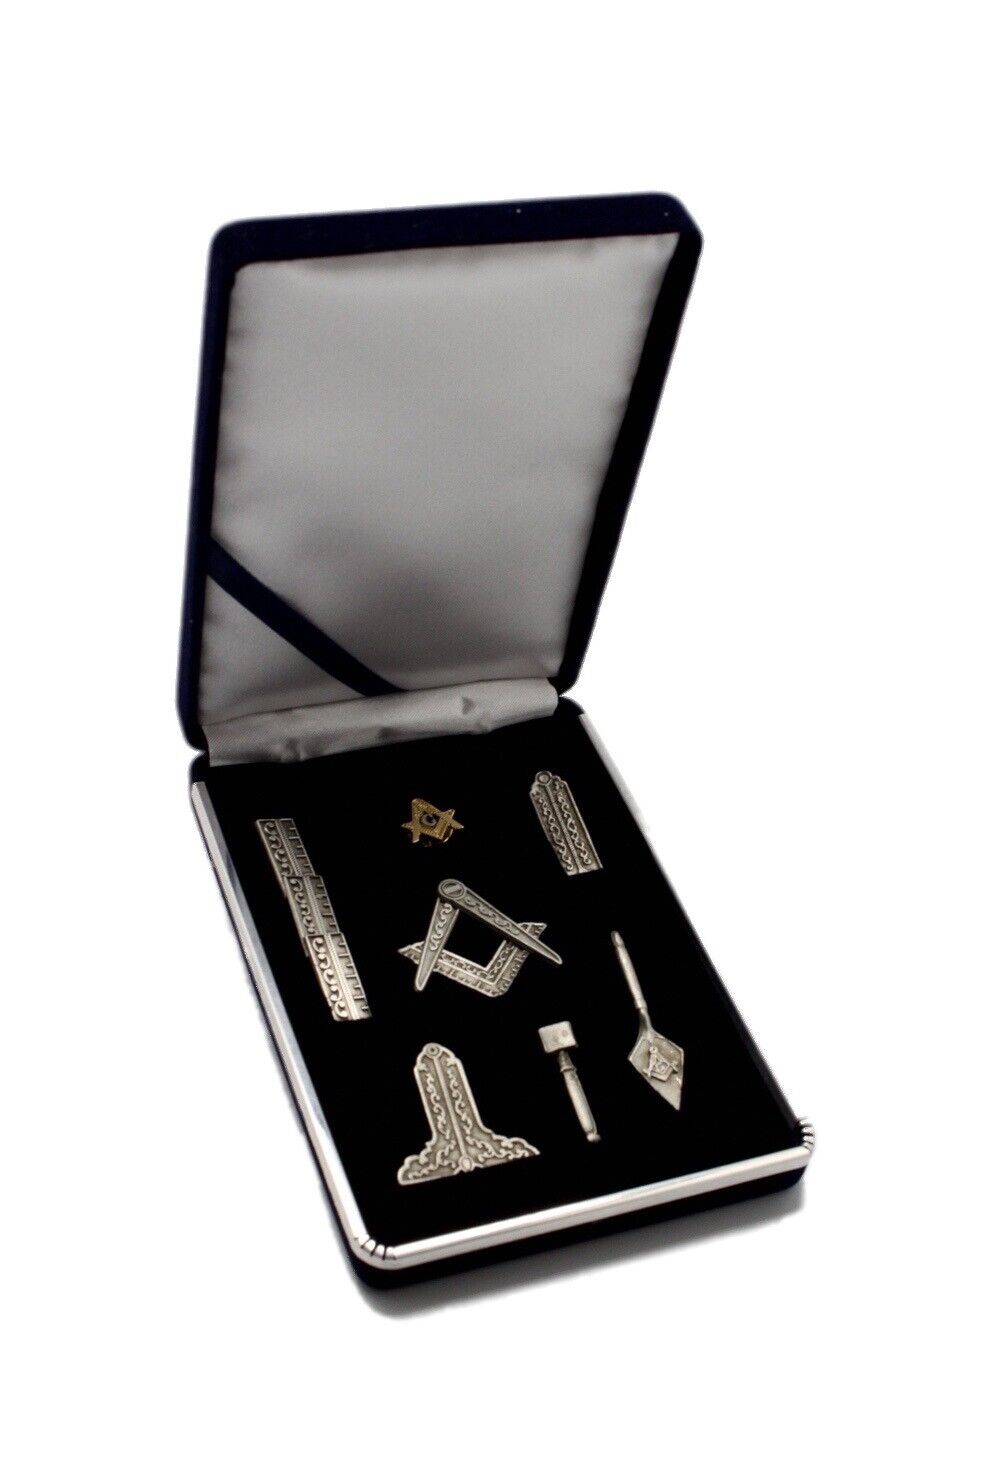 Blue Lodge Masonic Working Tools Miniature Antique Silver with Lapel Pin